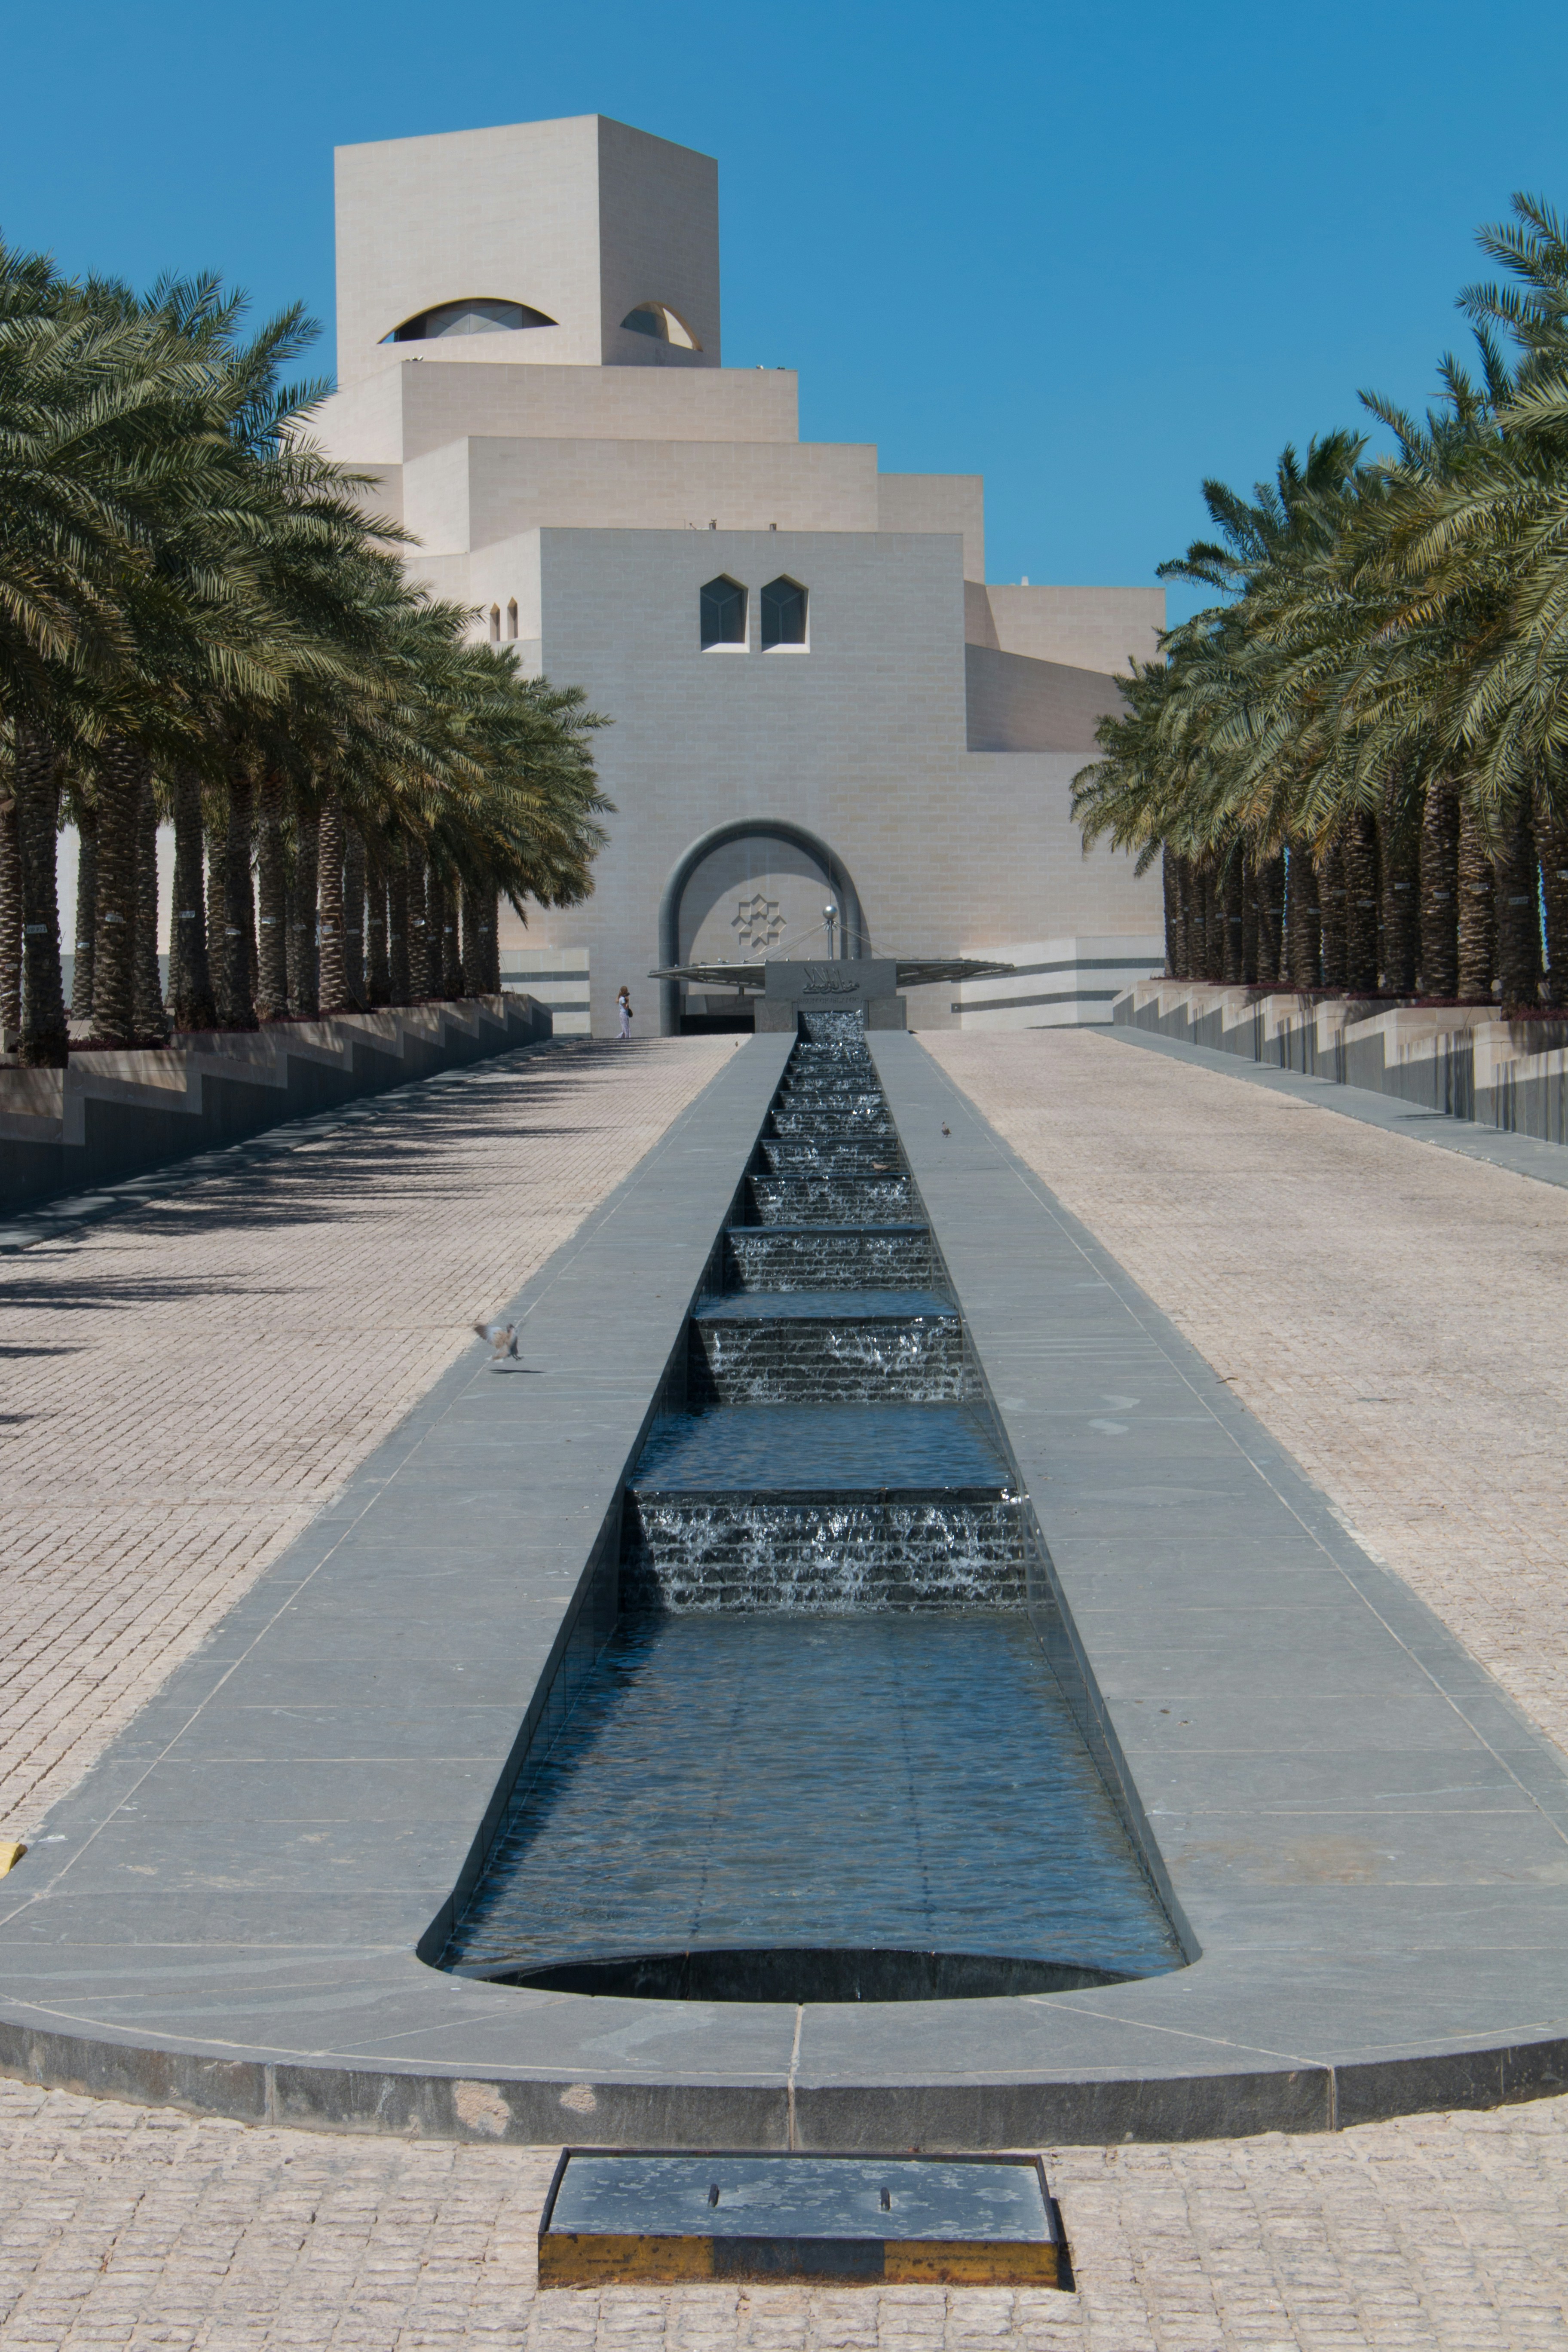 The Museum of Islamic Art is a museum on one end of the seven-kilometer-long Corniche in Doha, Qatar.